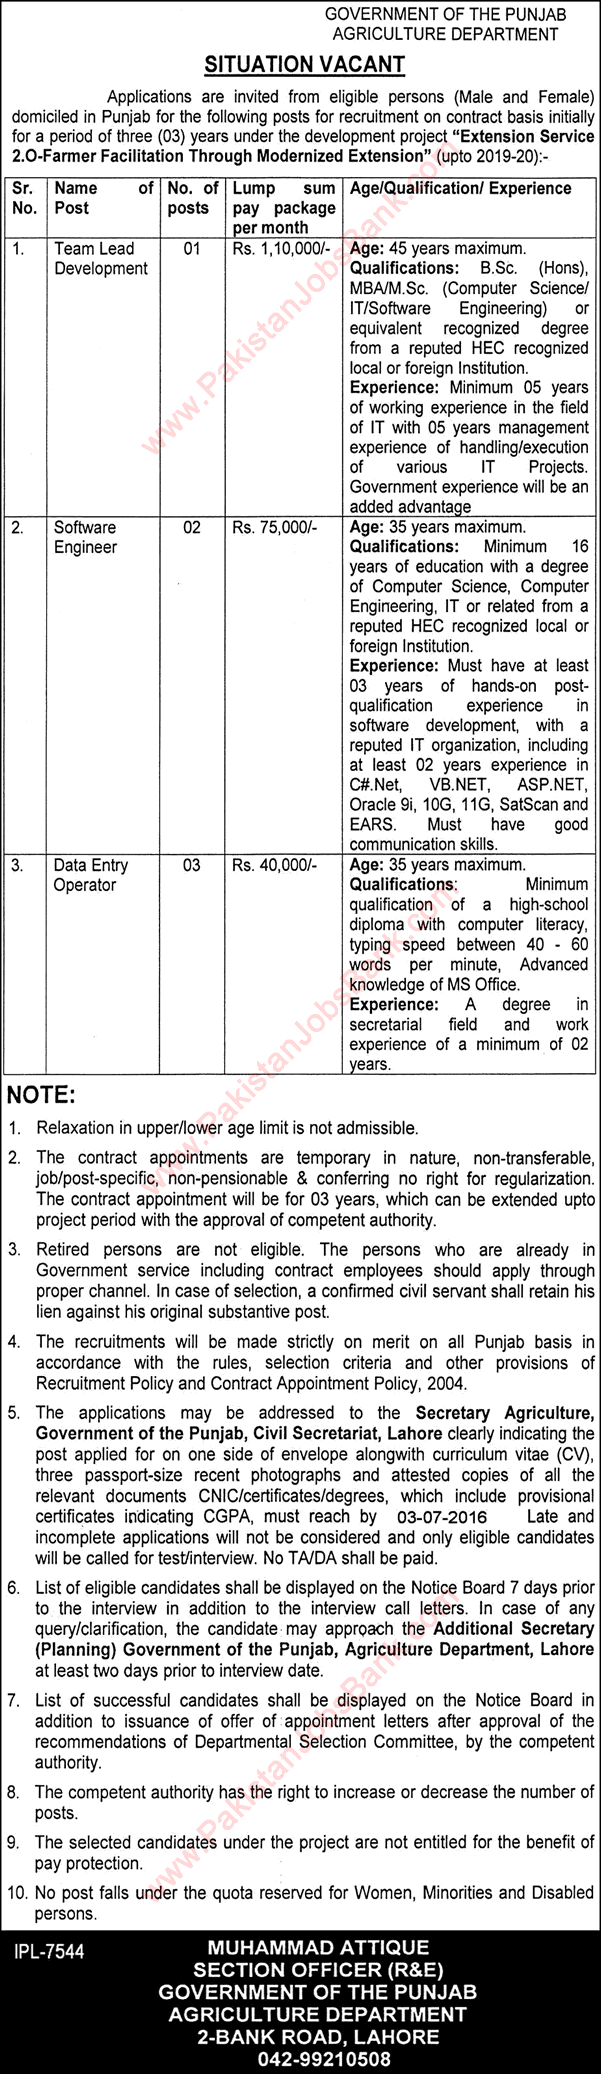 Agriculture Department Punjab Jobs June 2016 DEO, Software Engineers & Team Lead Development Latest